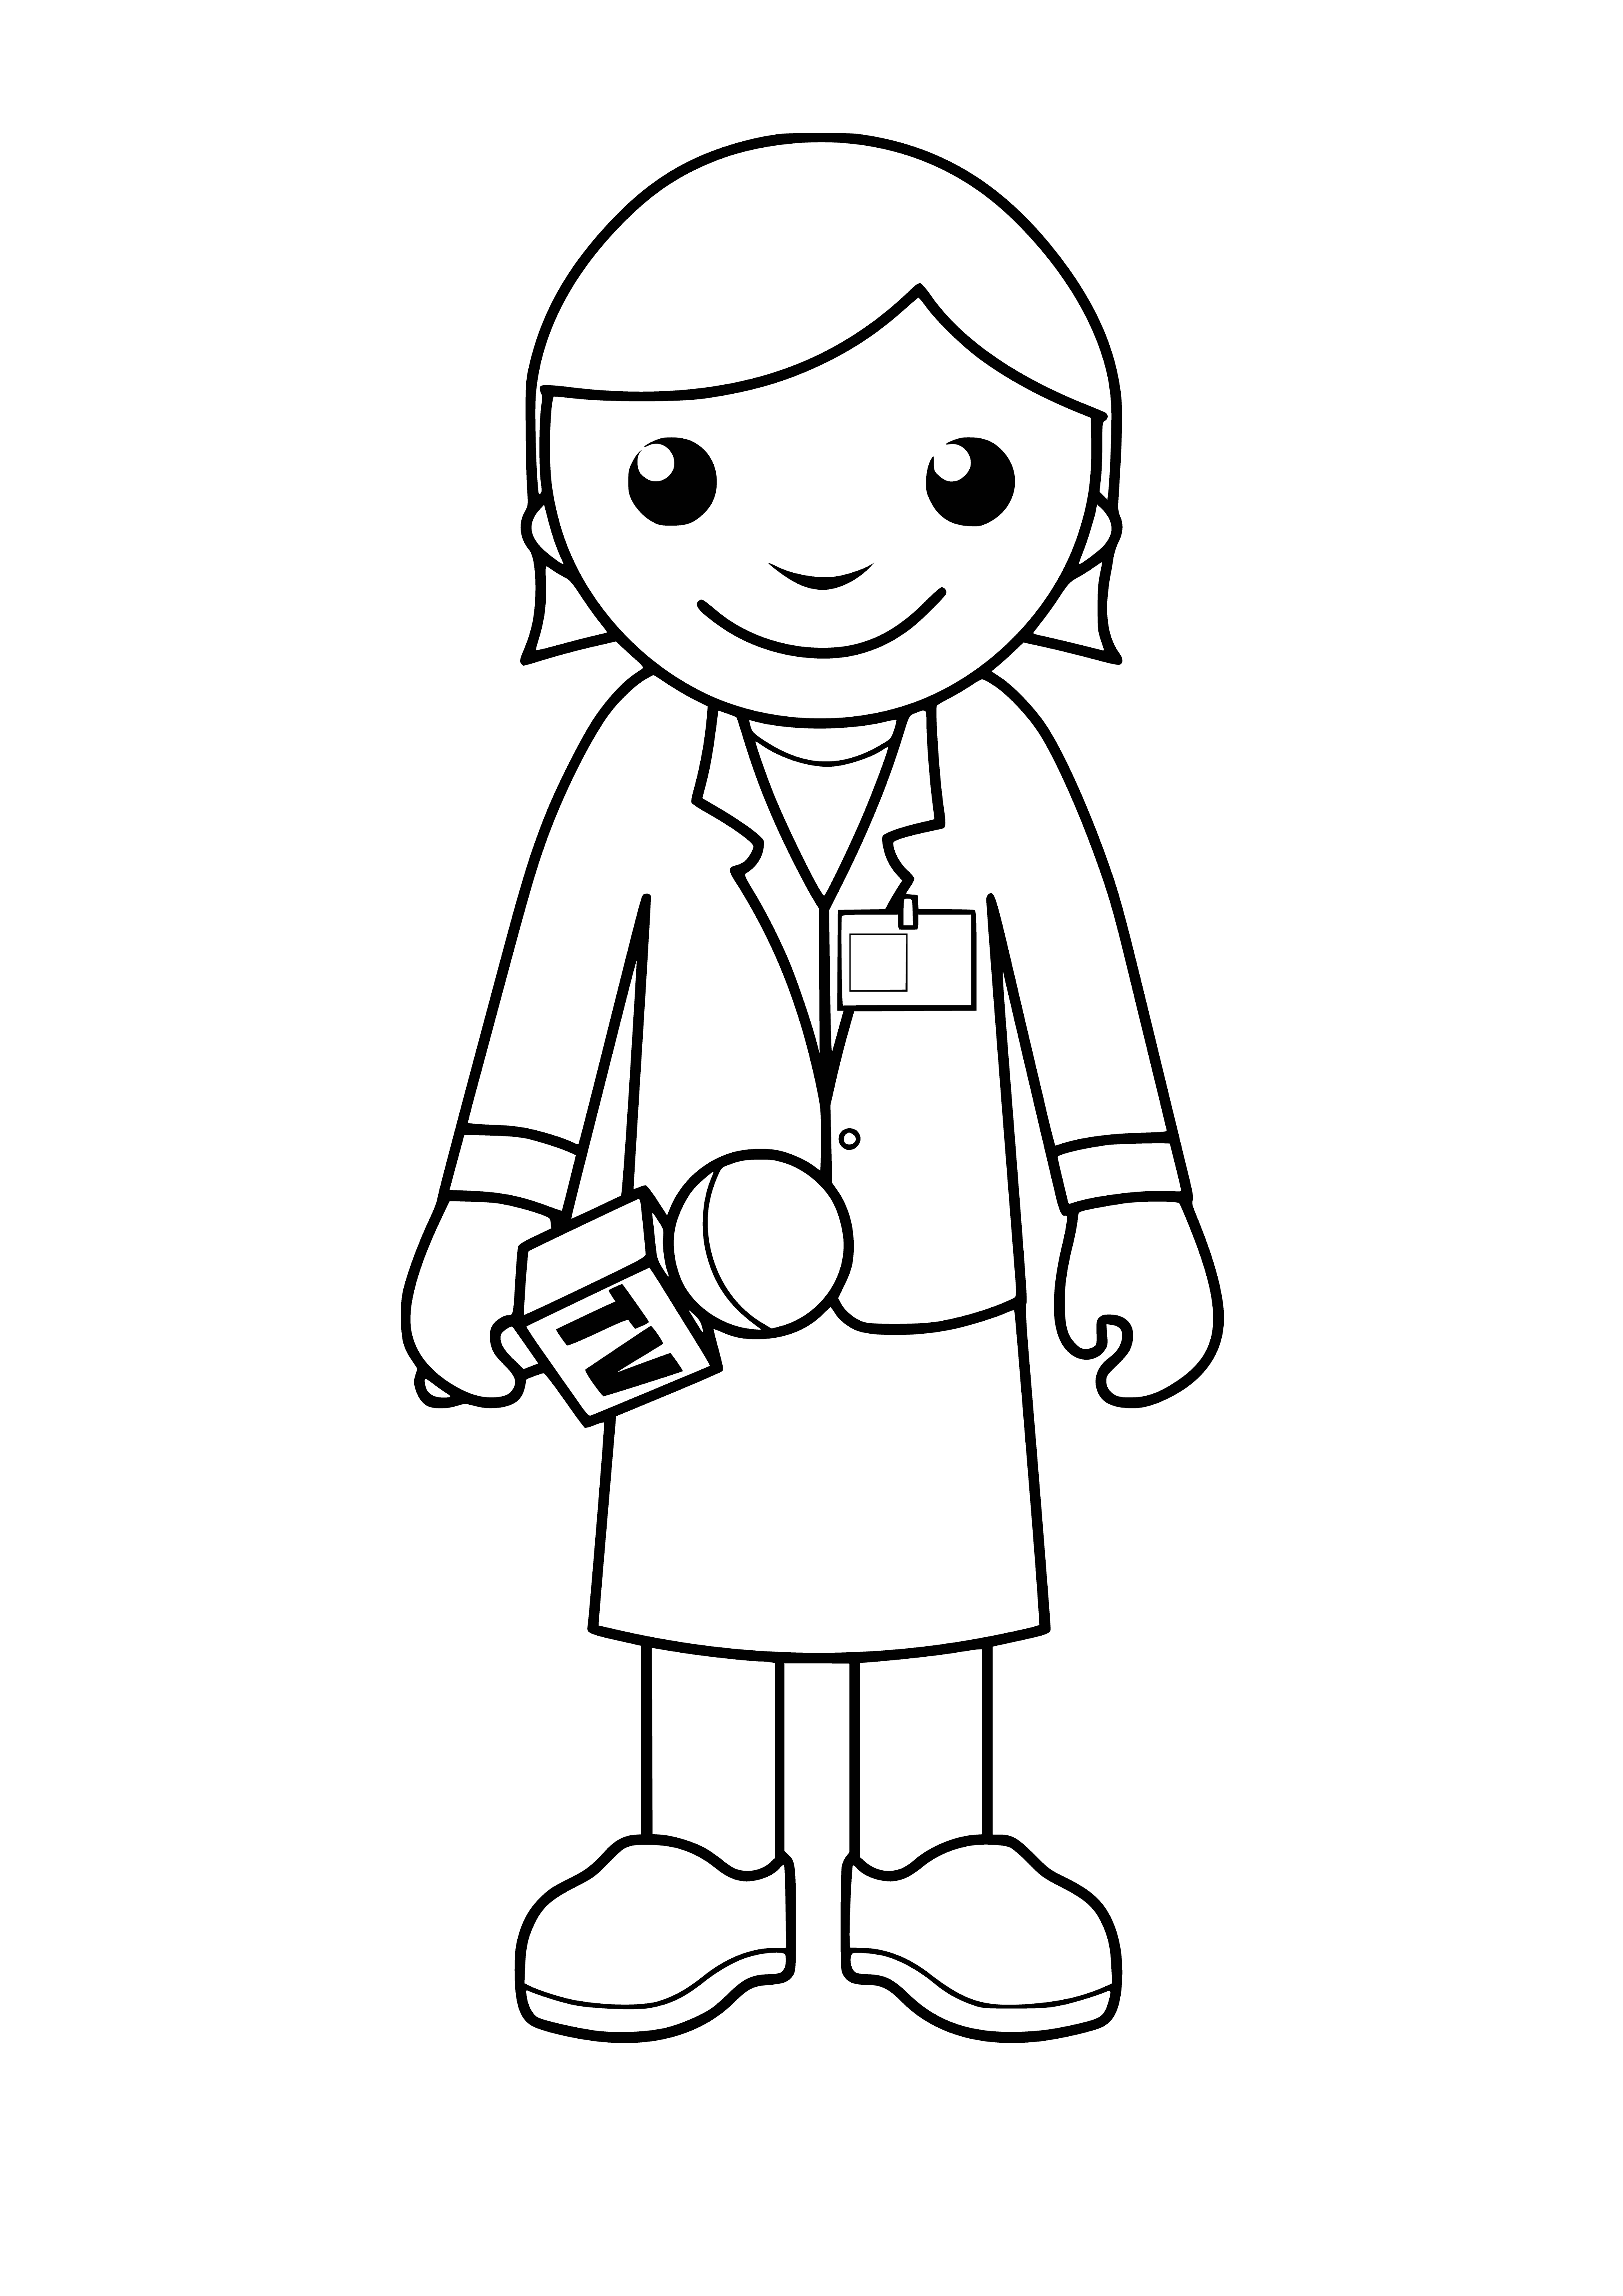 Reporter coloring page